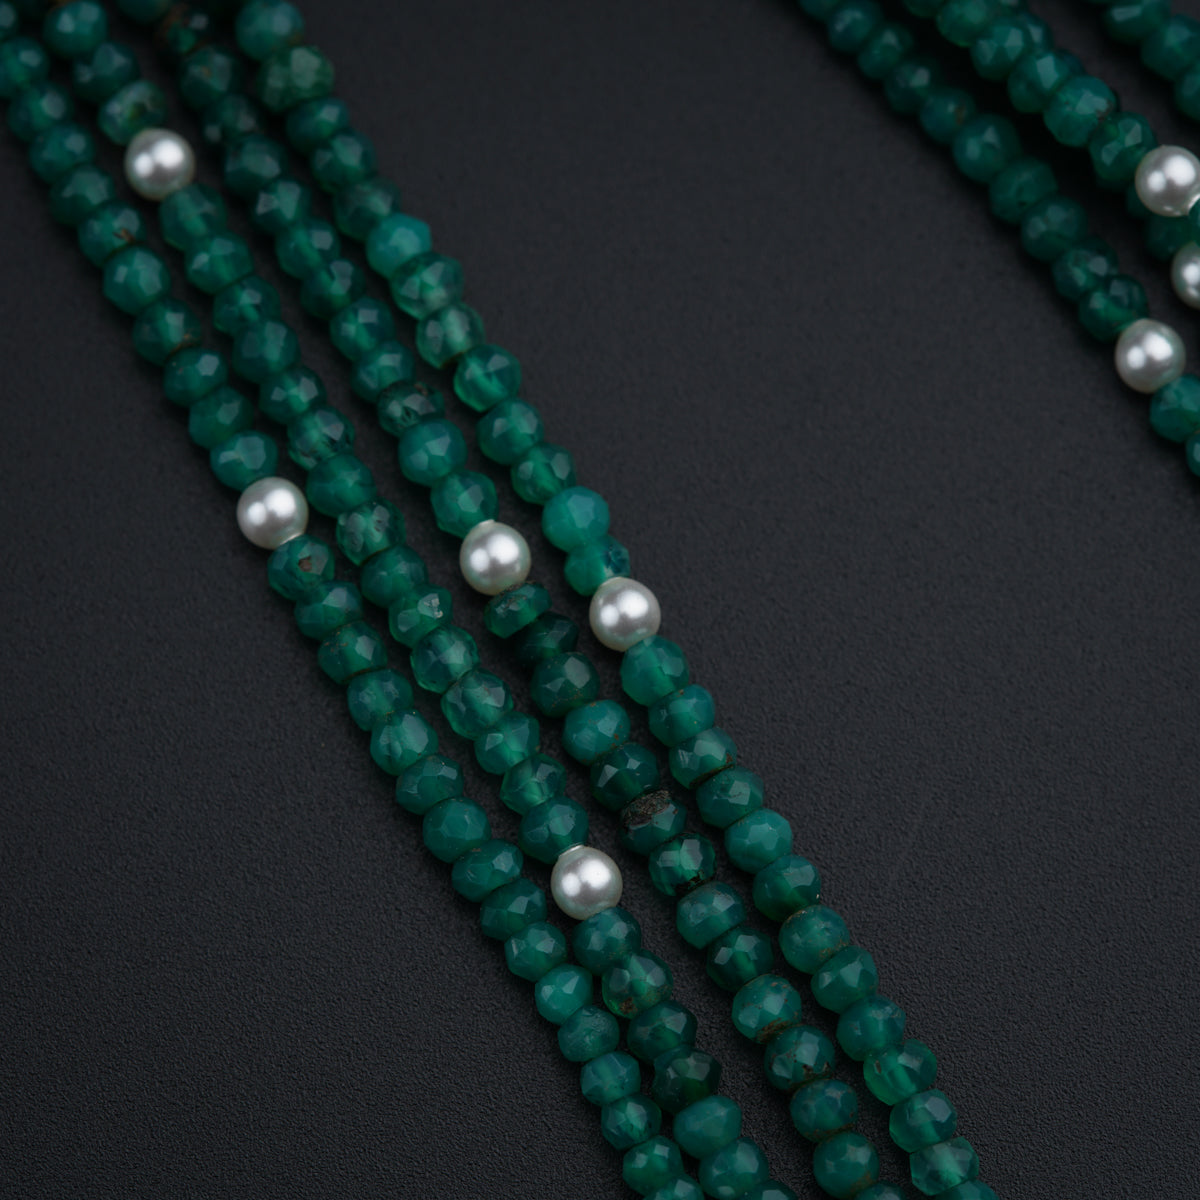 Classic Tanmani Set with Green Onyx and Pearls